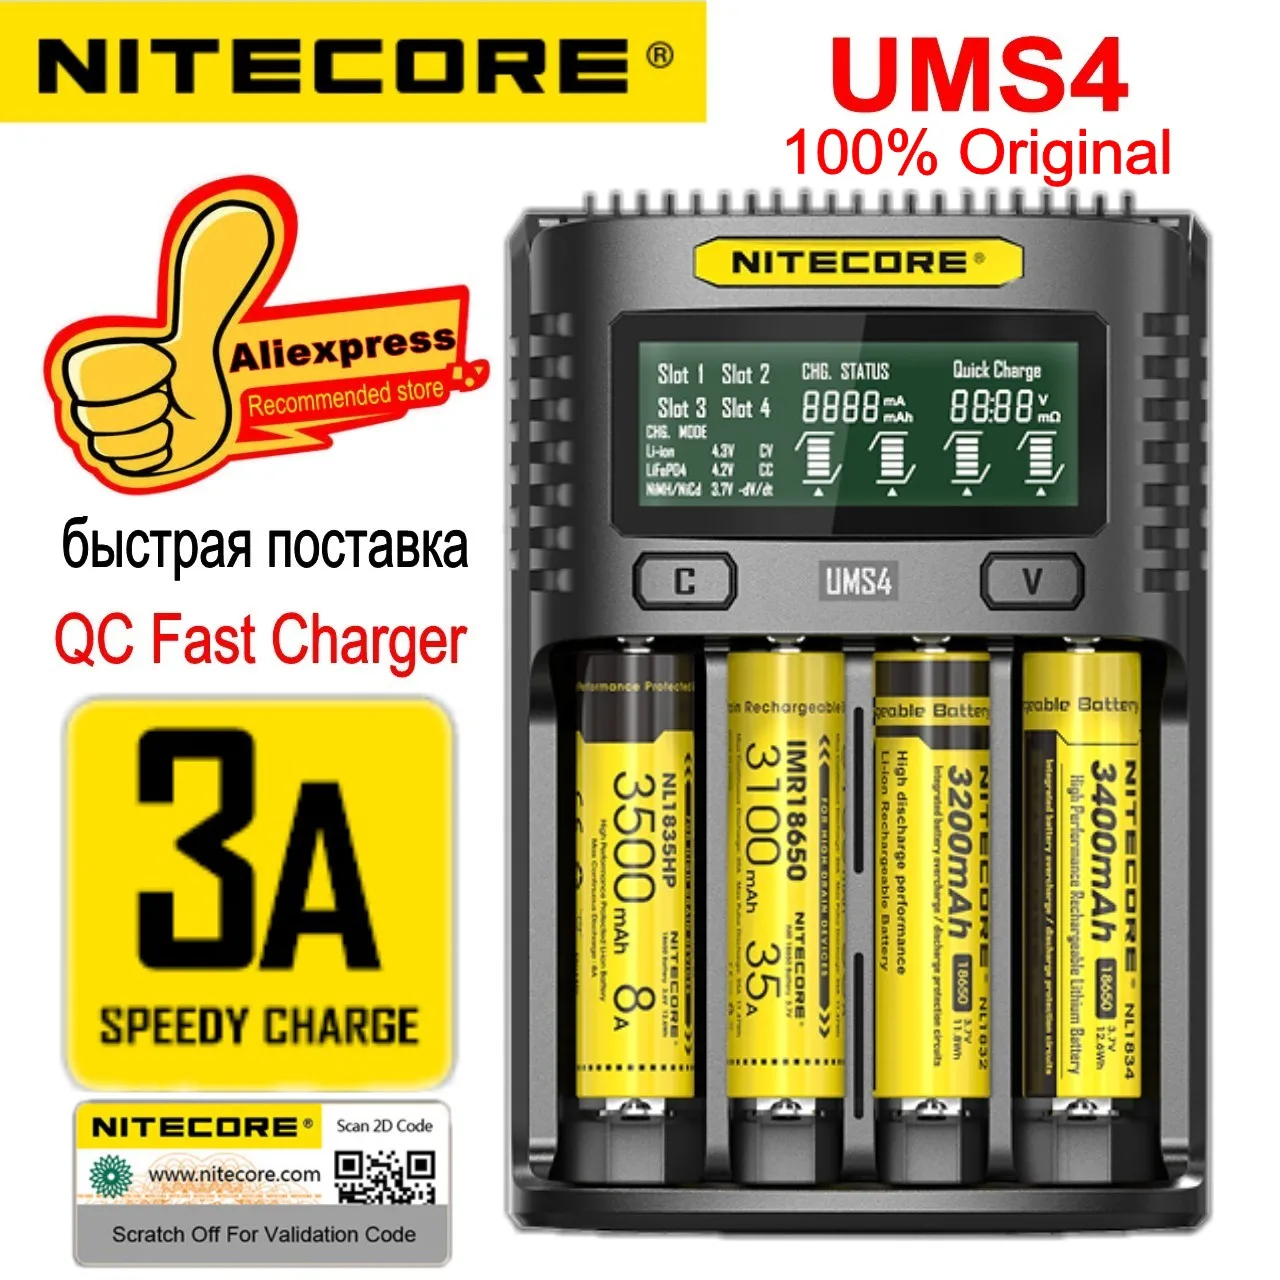 NITECORE UMS4 UMS2 VC4 LCD Smart Battery Charger for Li-ion/IMR/INR/ICR/LiFePO4 18650 14500 26650 AA 3.7 1.2V 1.5V Batteries D4